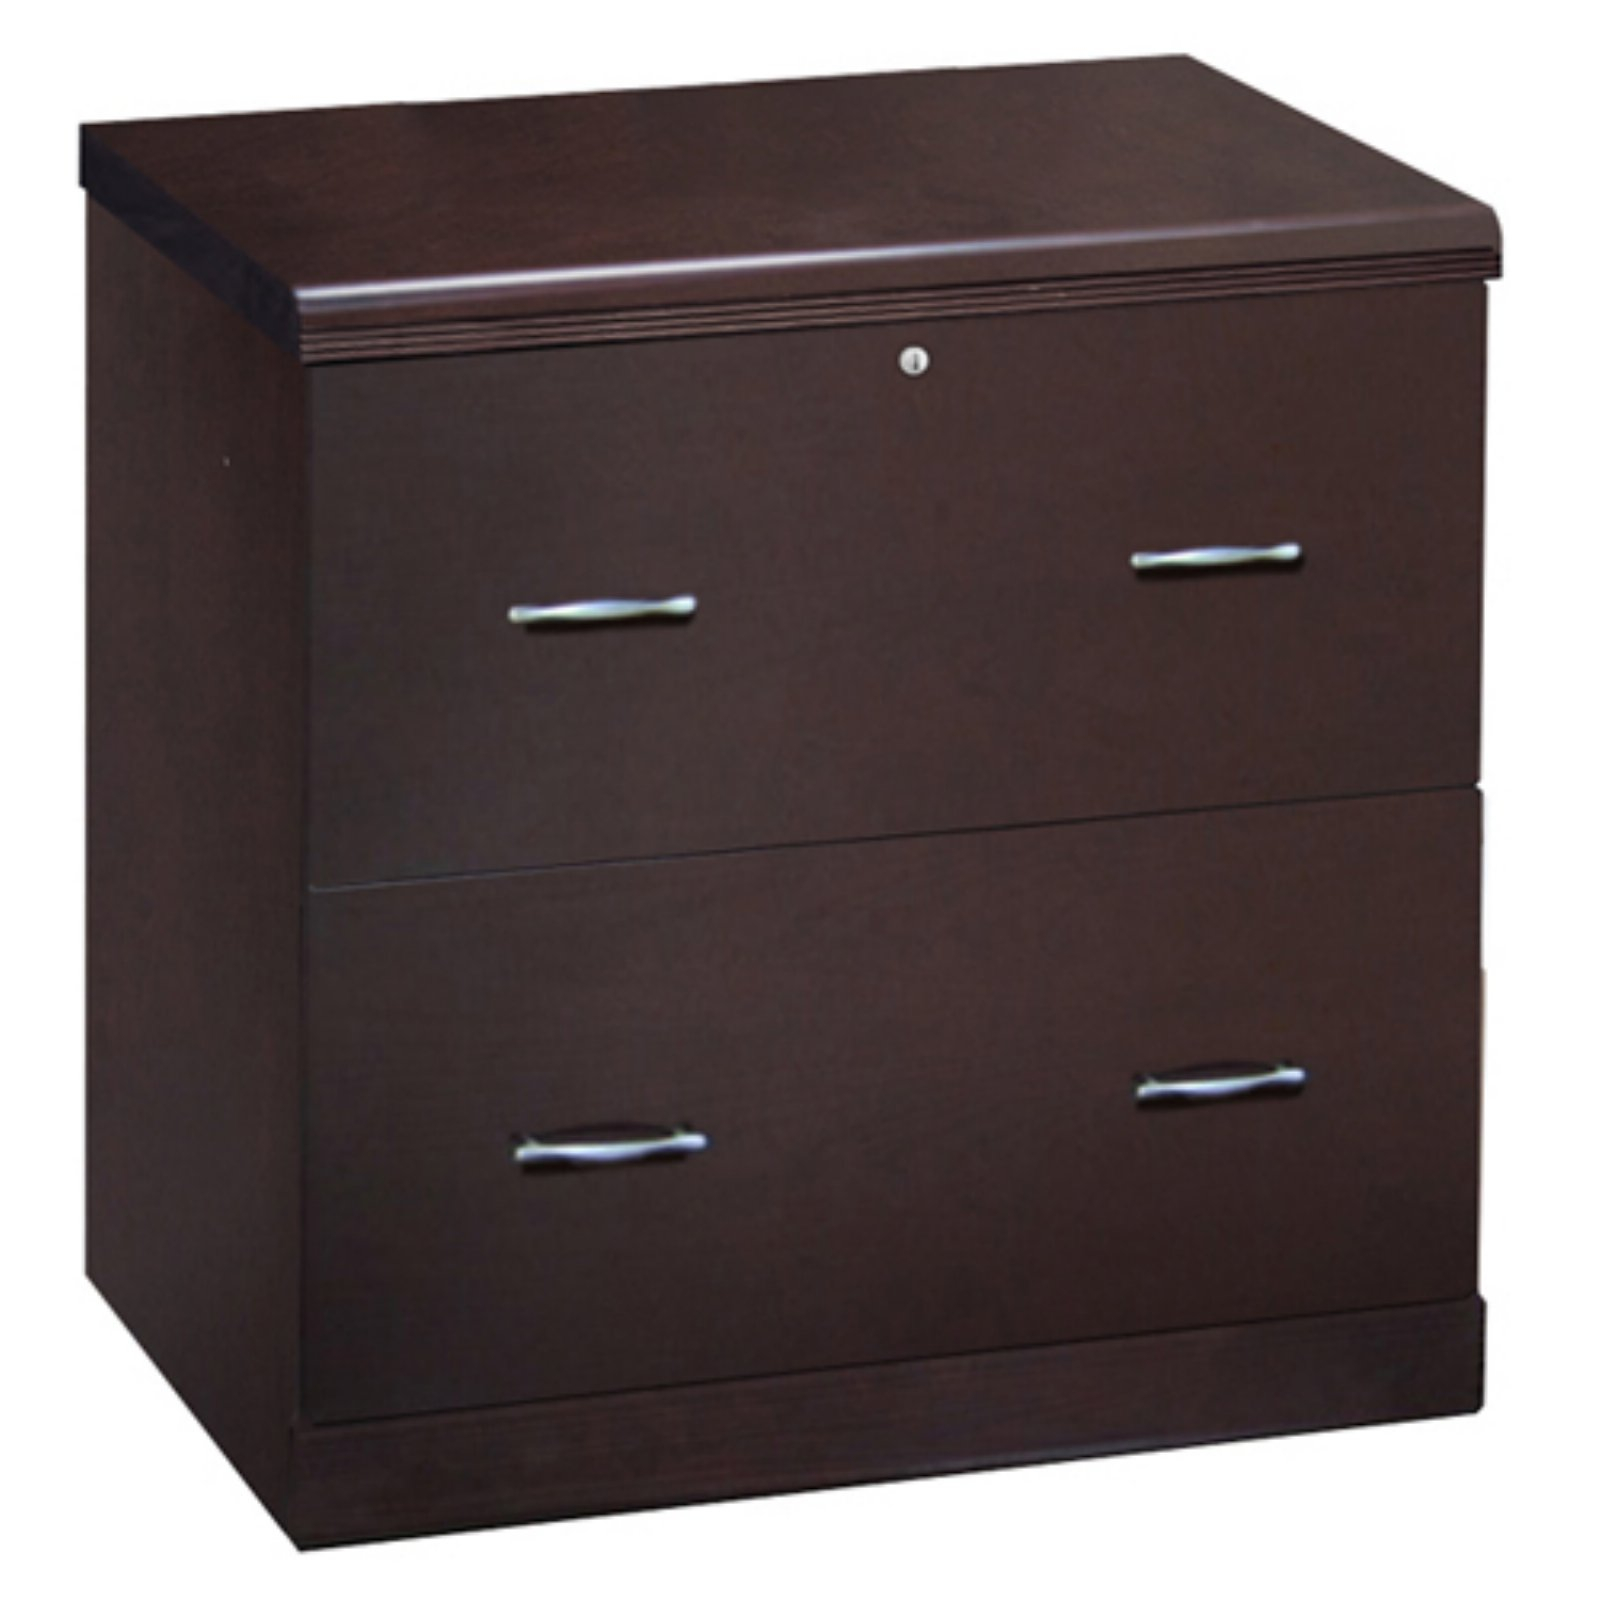 2 Drawer Lateral Wood Lockable Filing Cabinet Espresso Walmart in sizing 1600 X 1600